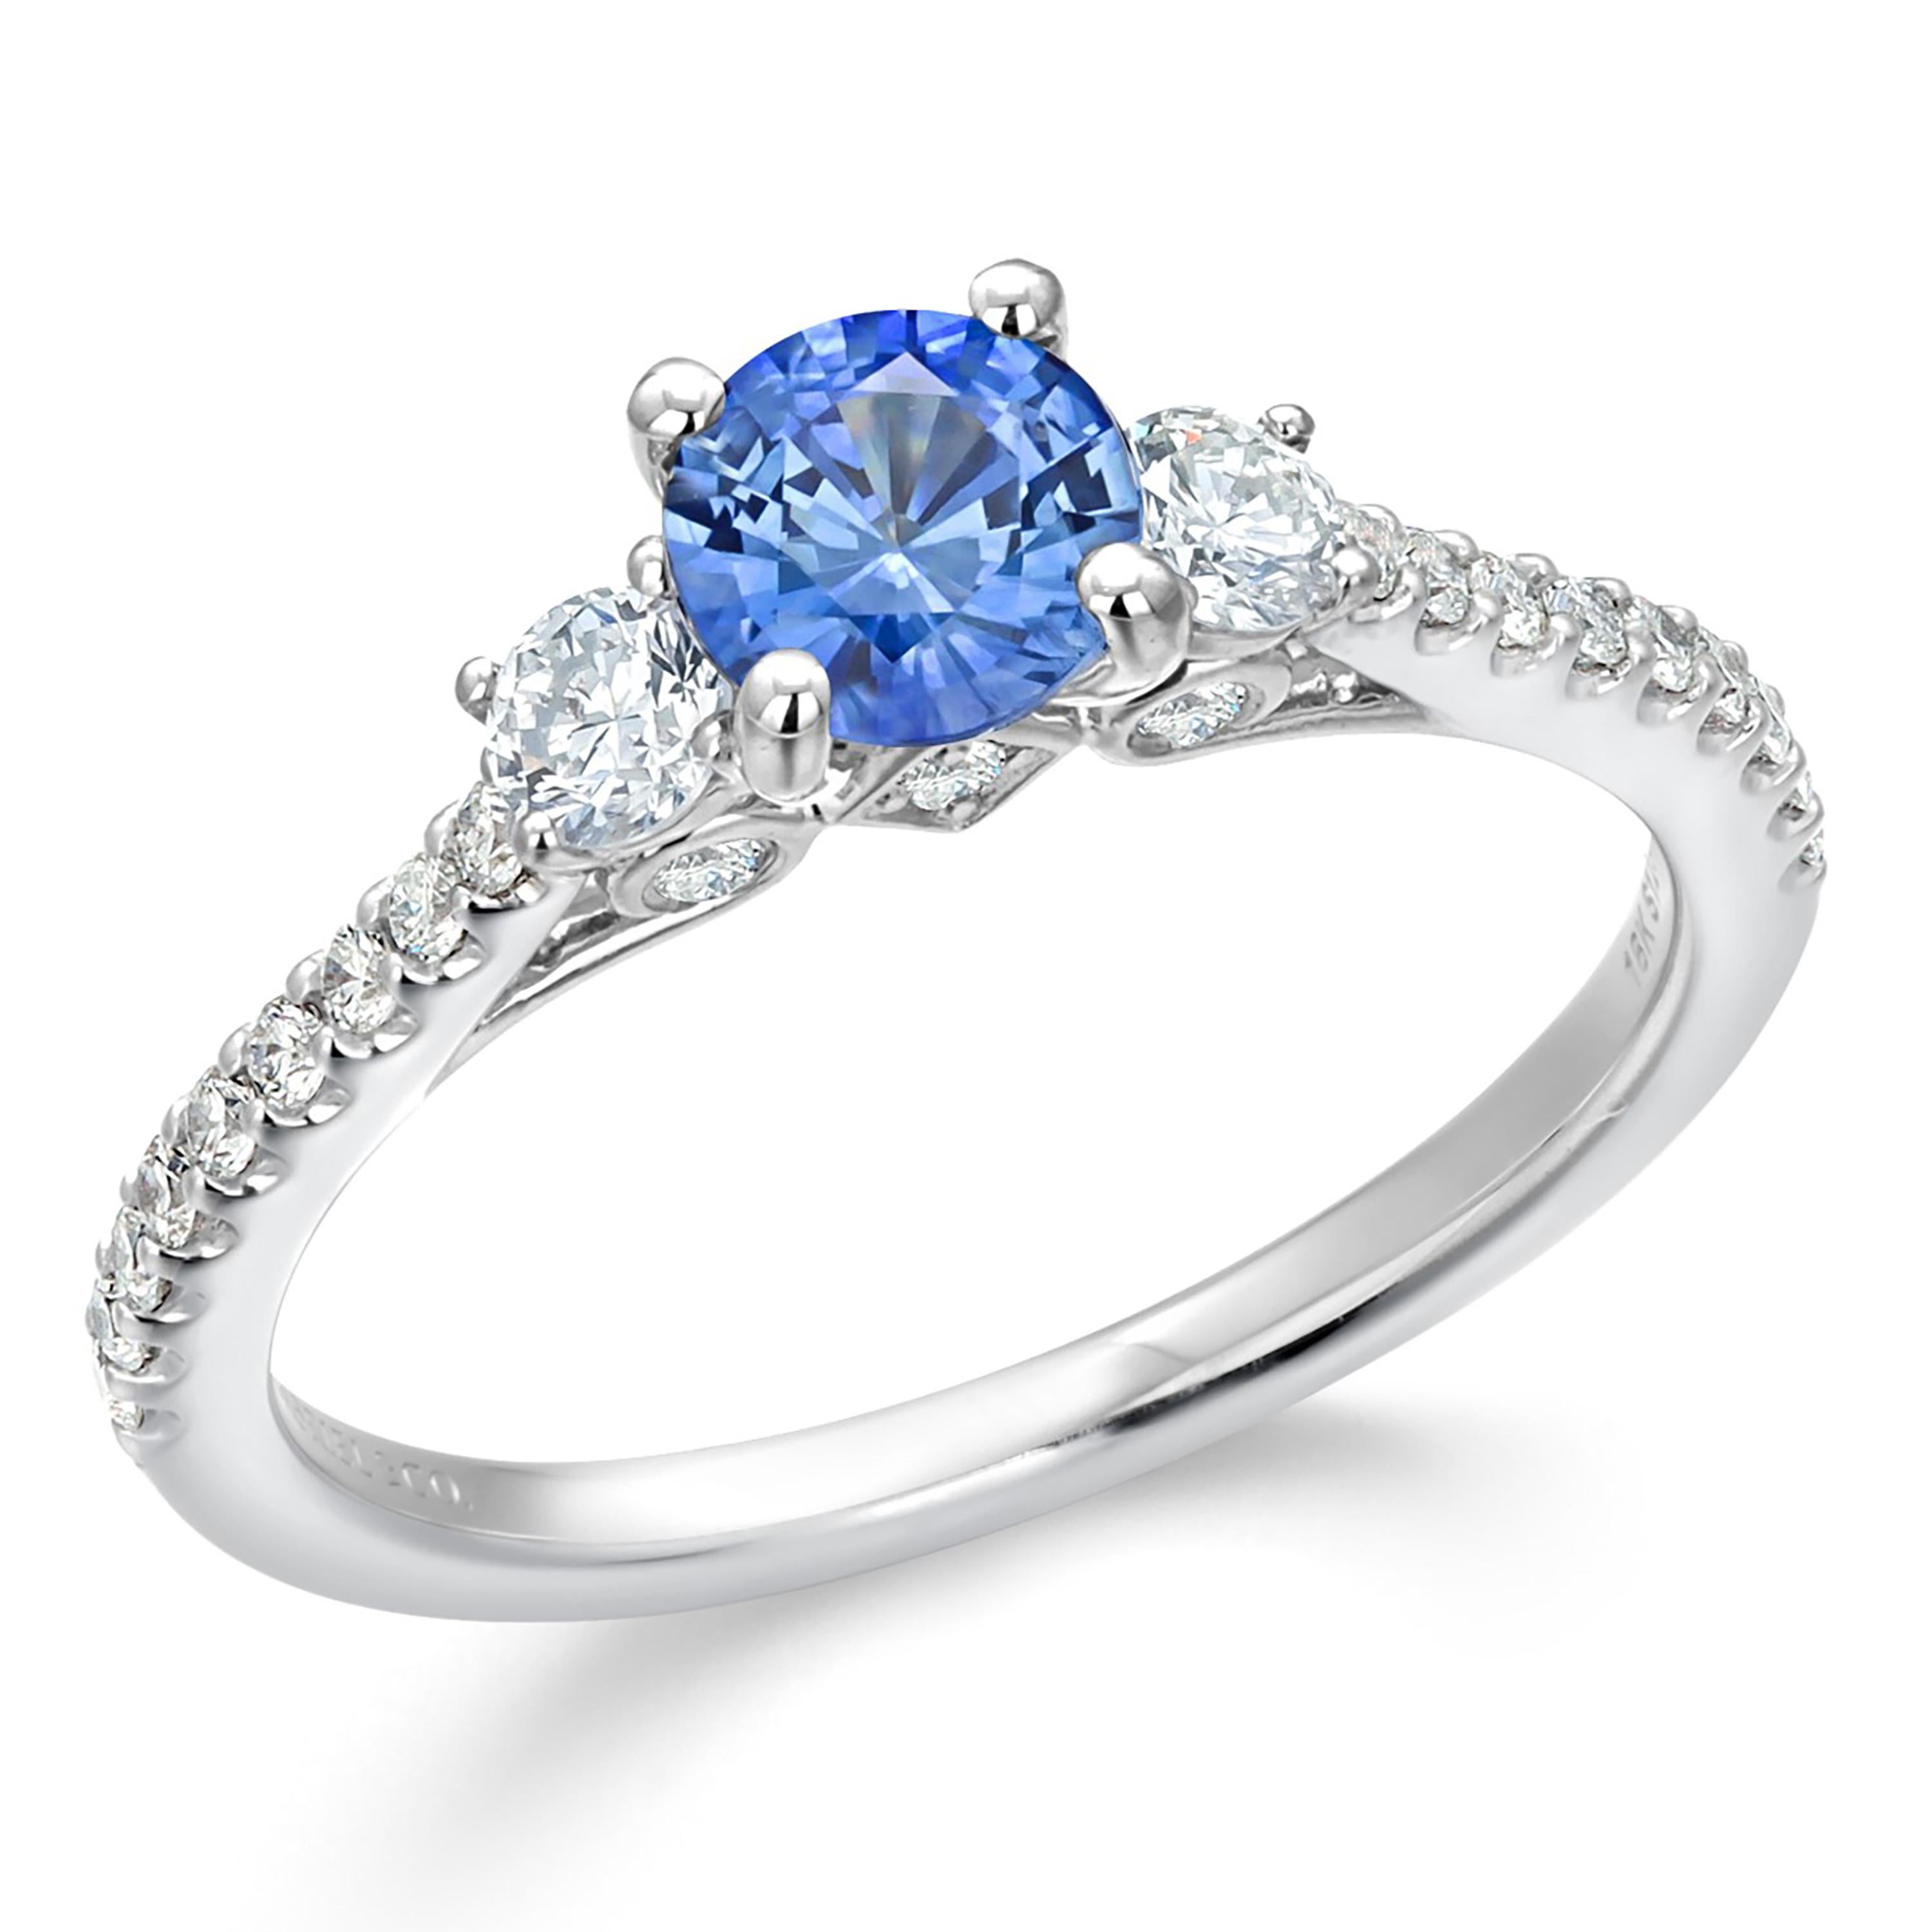  18 Karat White Gold Diamond and Ceylon Sapphire 1.53 Carat Engagement Ring In Good Condition For Sale In New York, NY